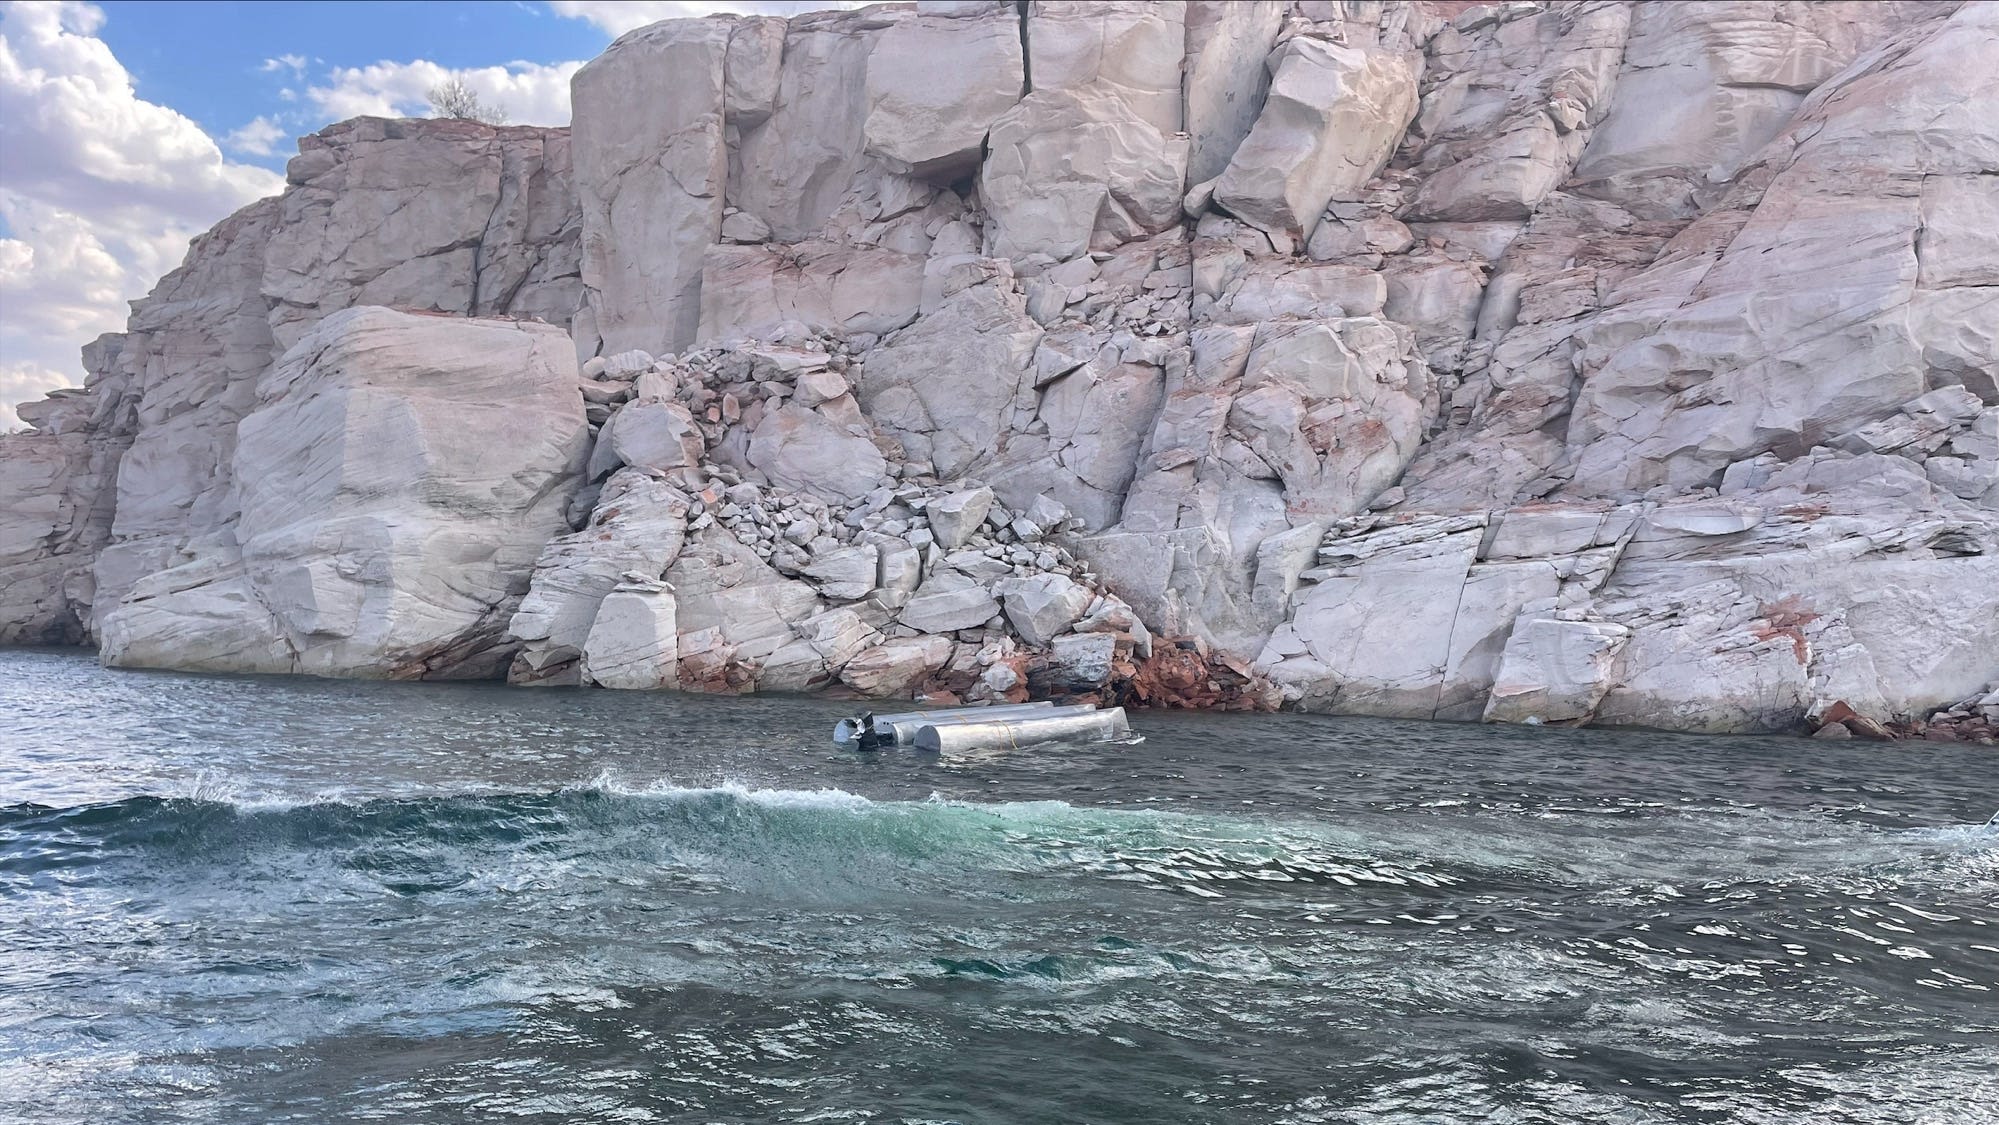 72-year-old woman, 2 children dead after pontoon boat capsizes on Lake Powell in Arizona